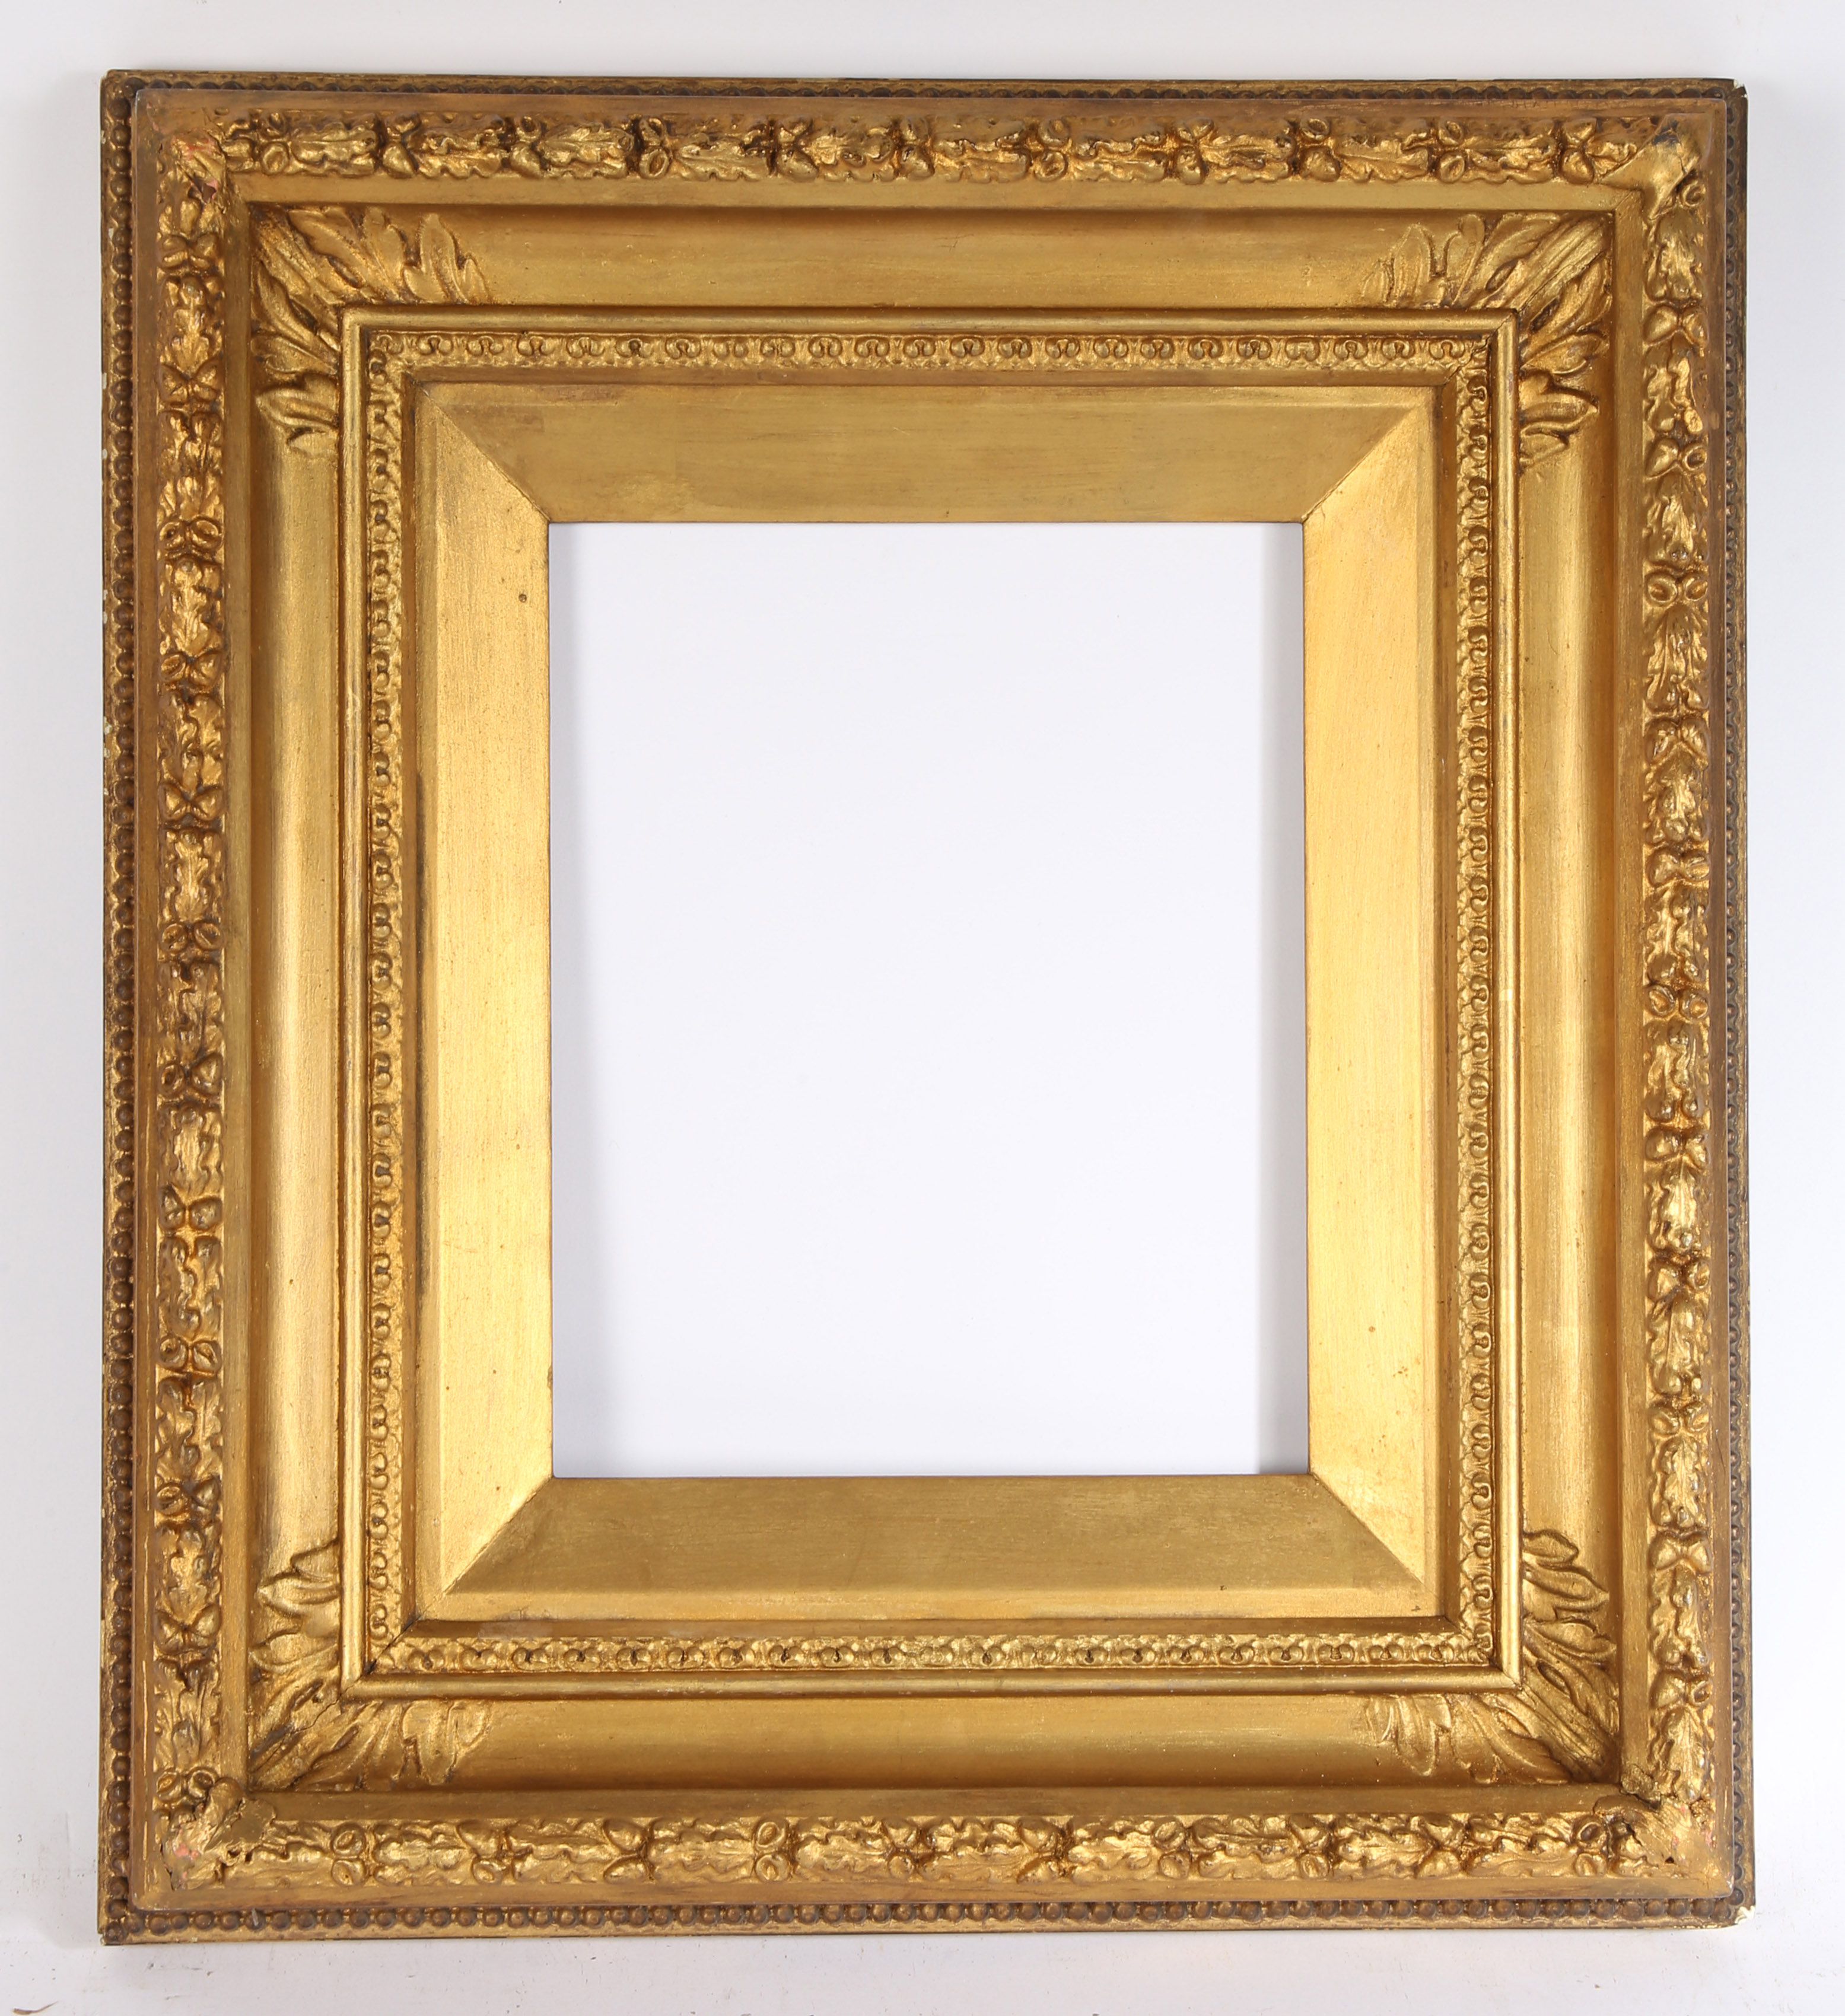 19th century straight picture frame with acanthus leaf corners - rebate size  10in x 8in - Image 6 of 9